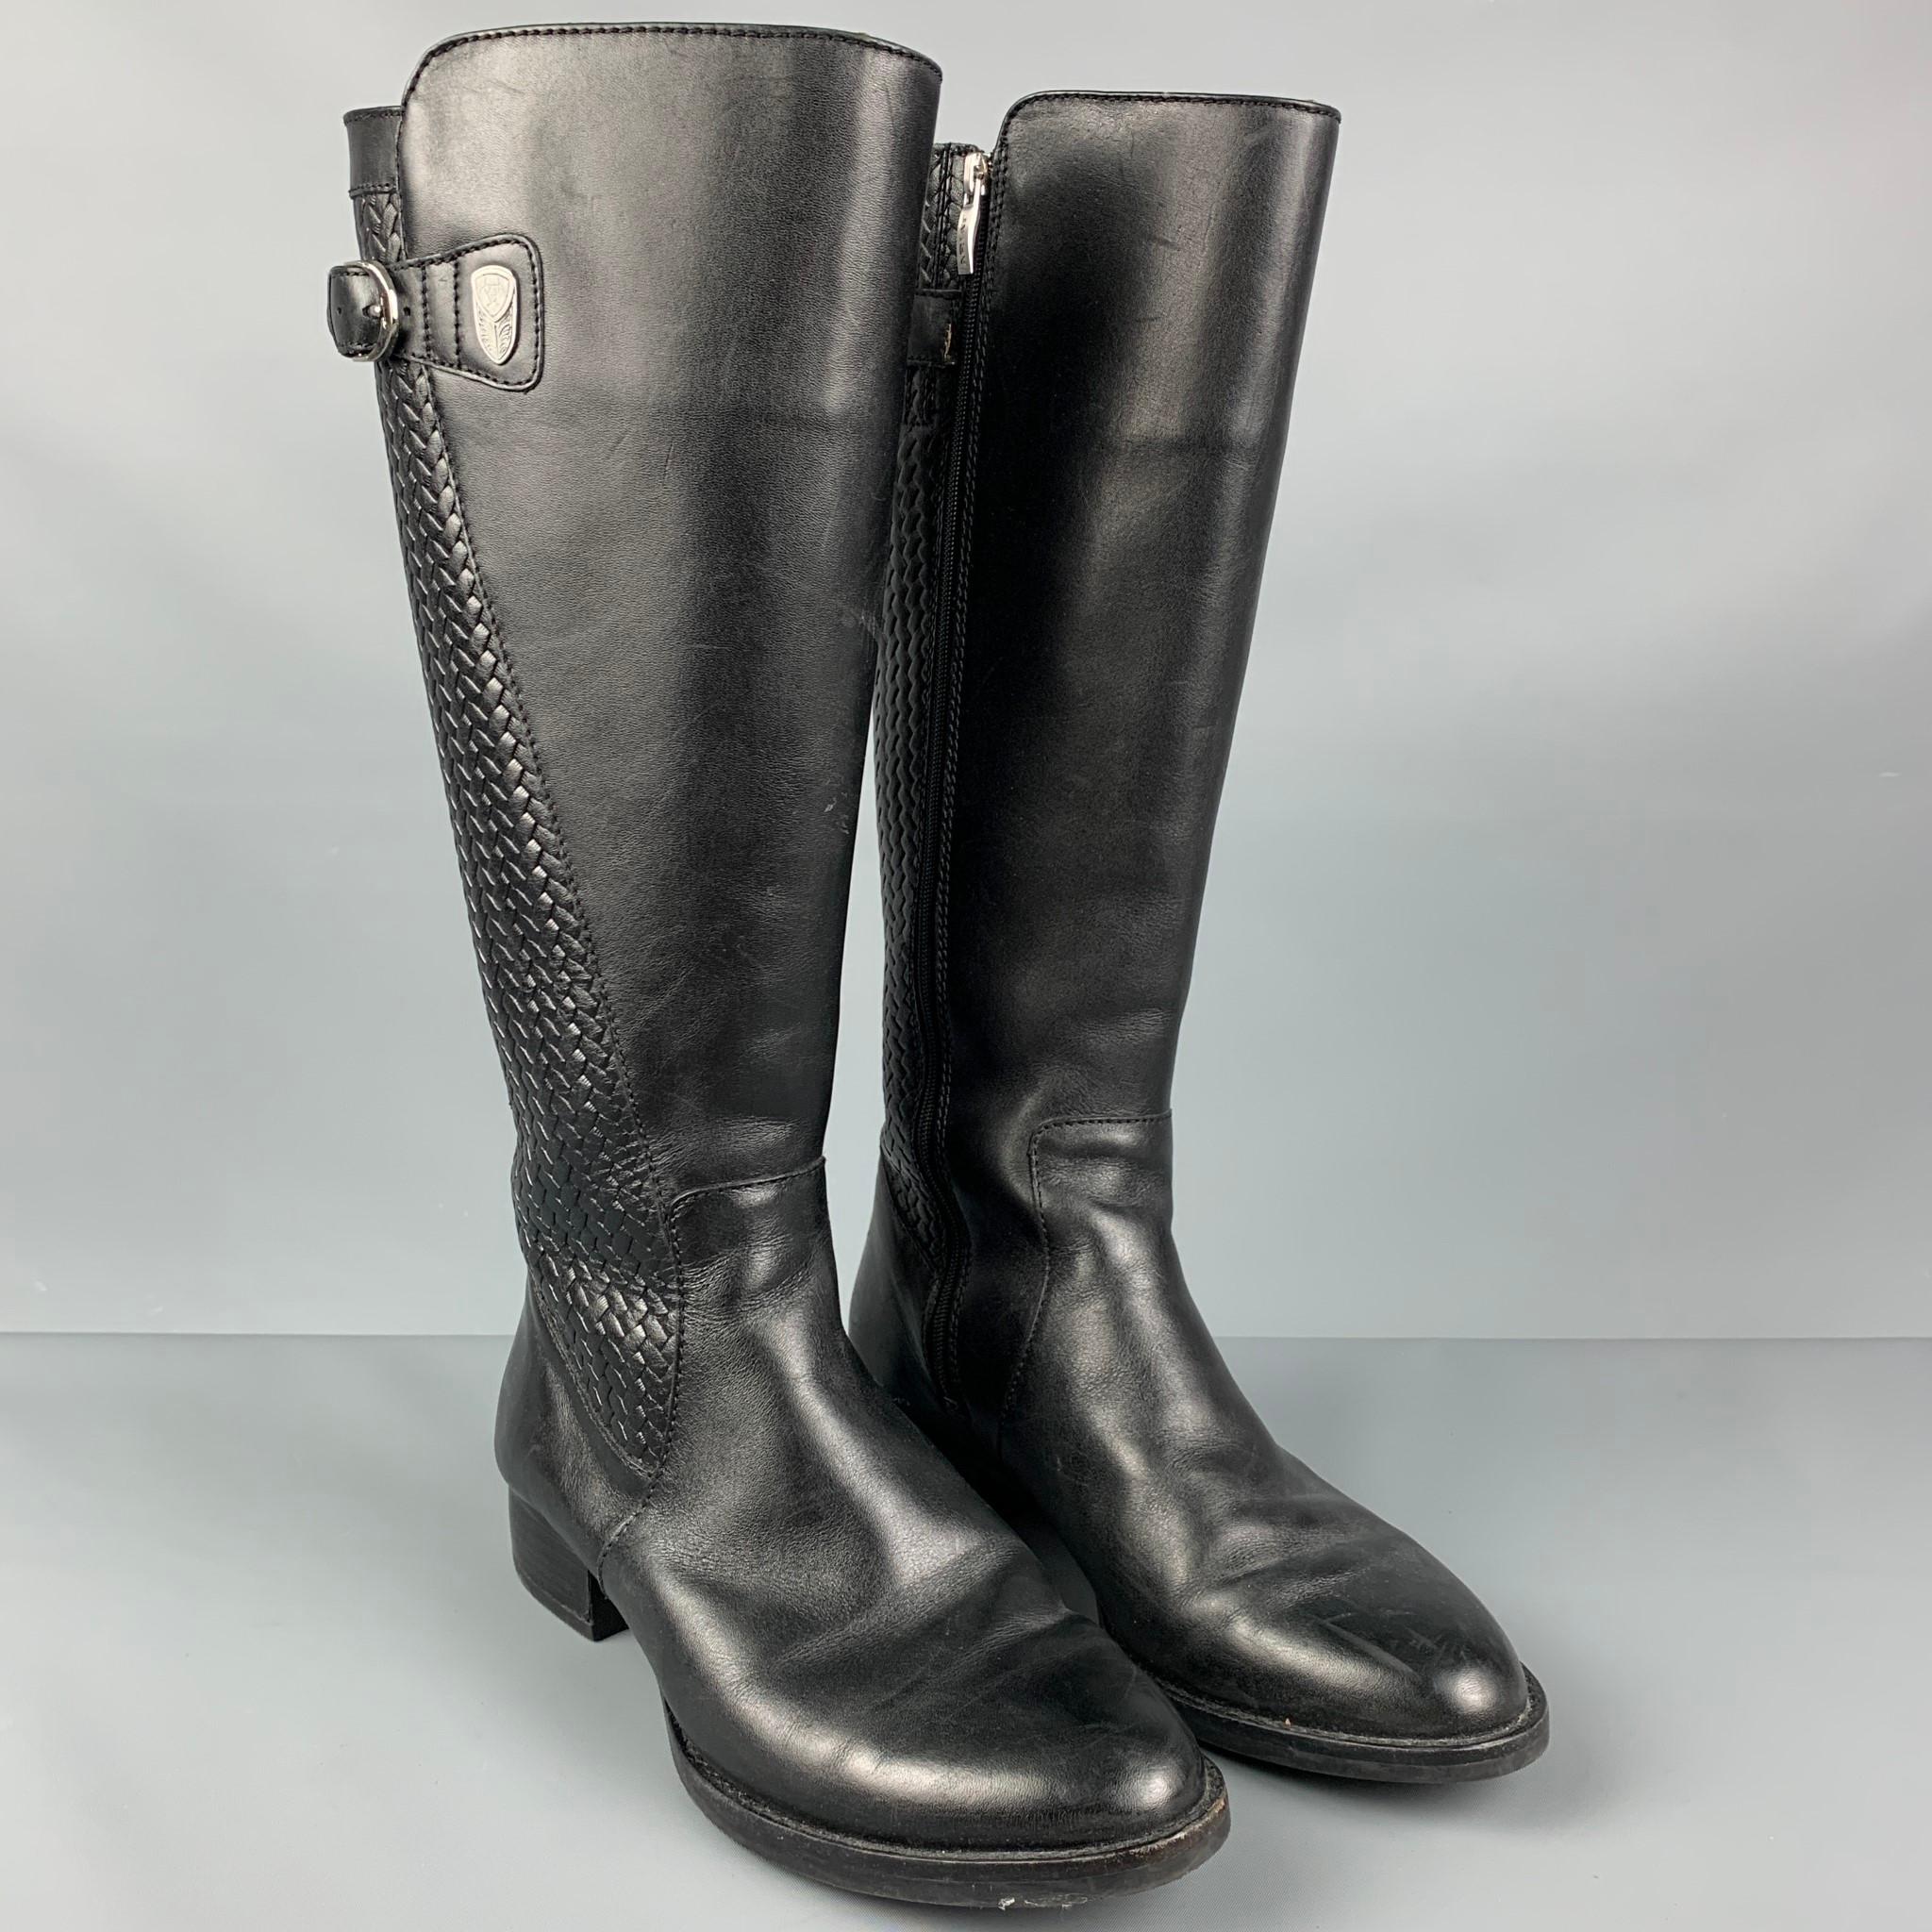 ARIAT boots comes in a black leather featuring a woven panel, buckle detail, and a side zipper closure. 

Very Good Pre-Owned Condition.
Marked: 7.5

Measurements:

Length: 10.5 in.
Width: 3.5 in.
Height: 15 in. 